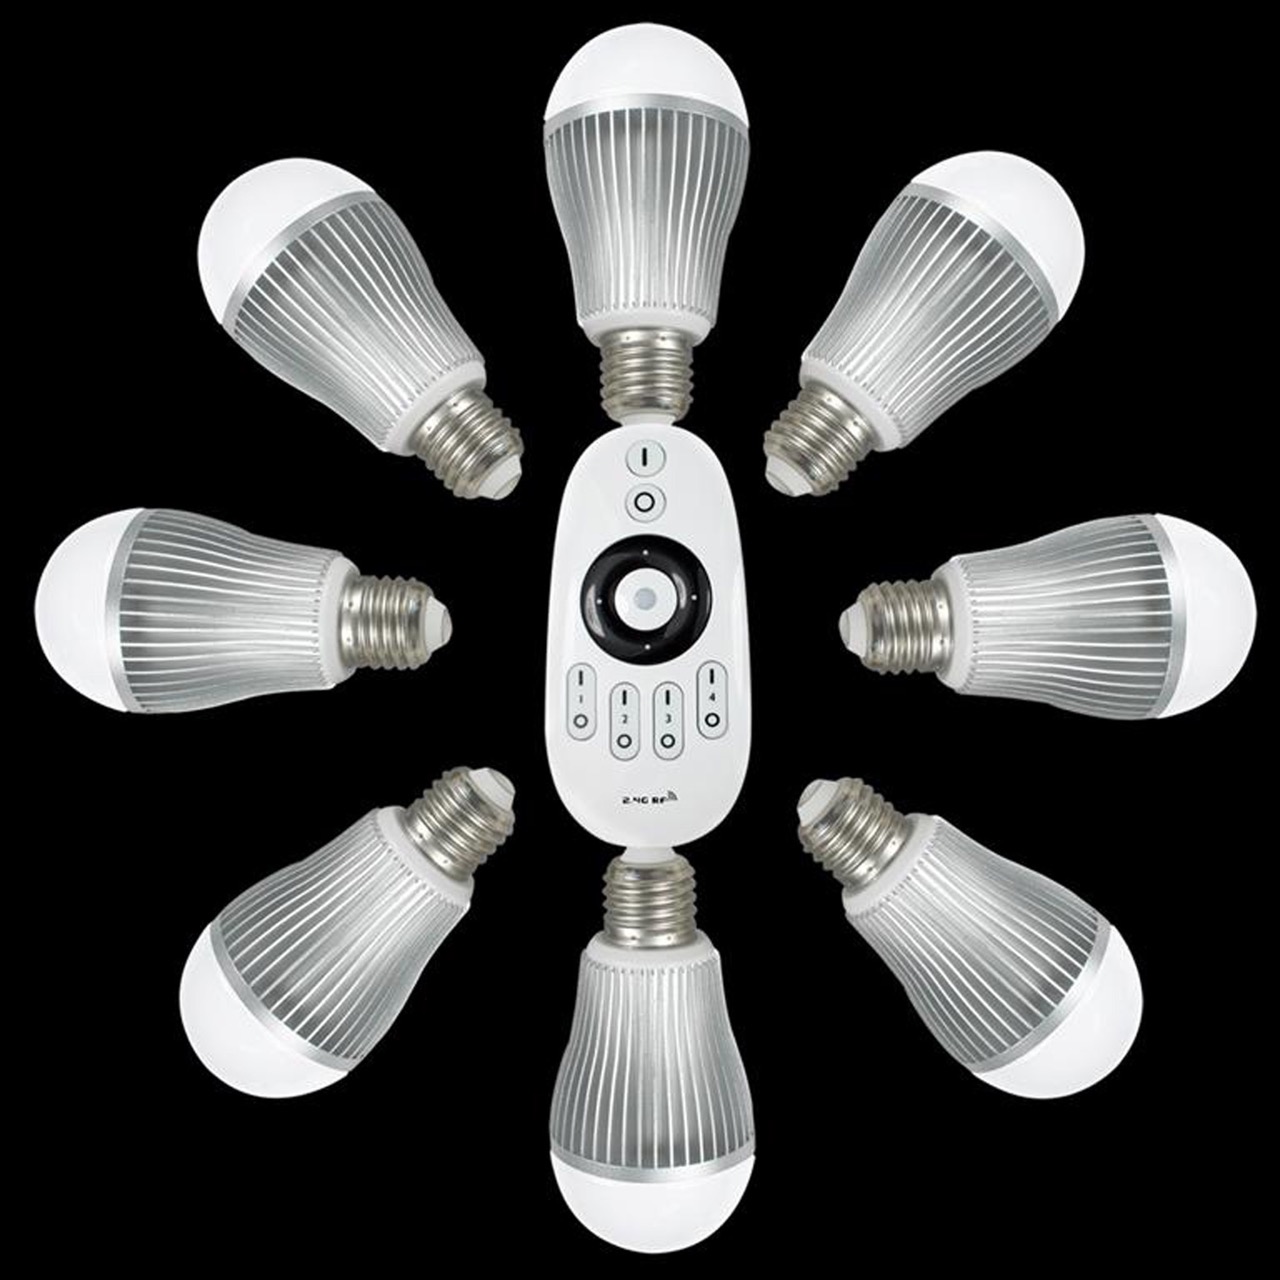 What Is An LED Light Bulb